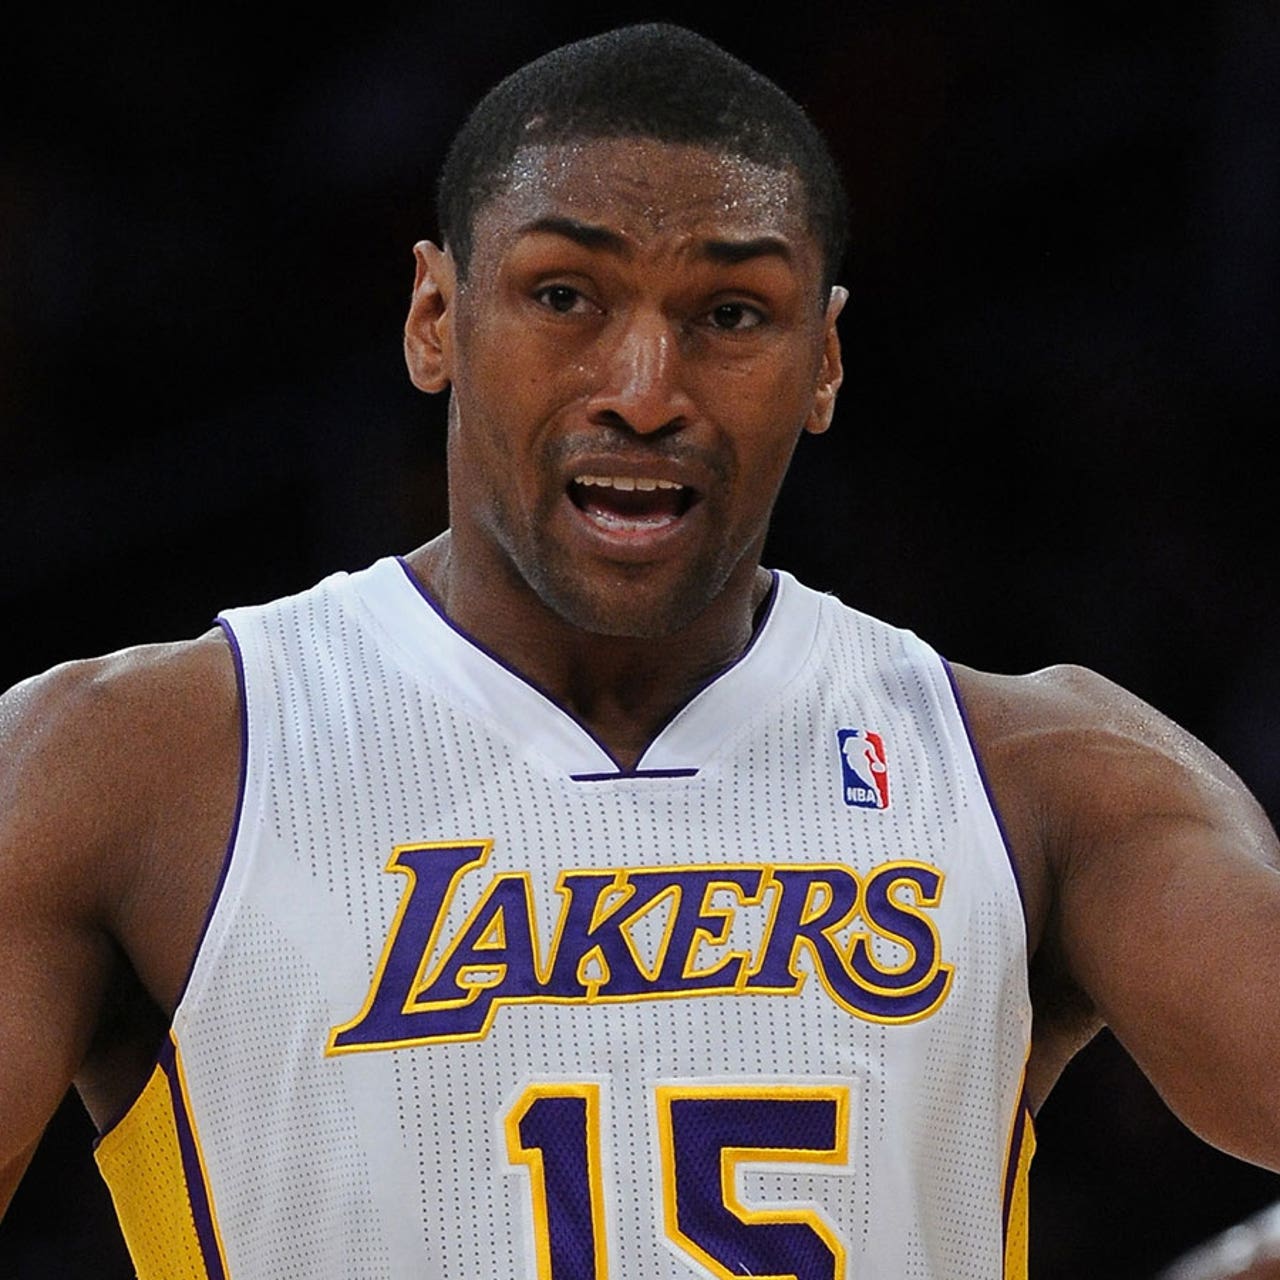 Lakers' Metta World Peace Has Become a Team Leader - The New York Times